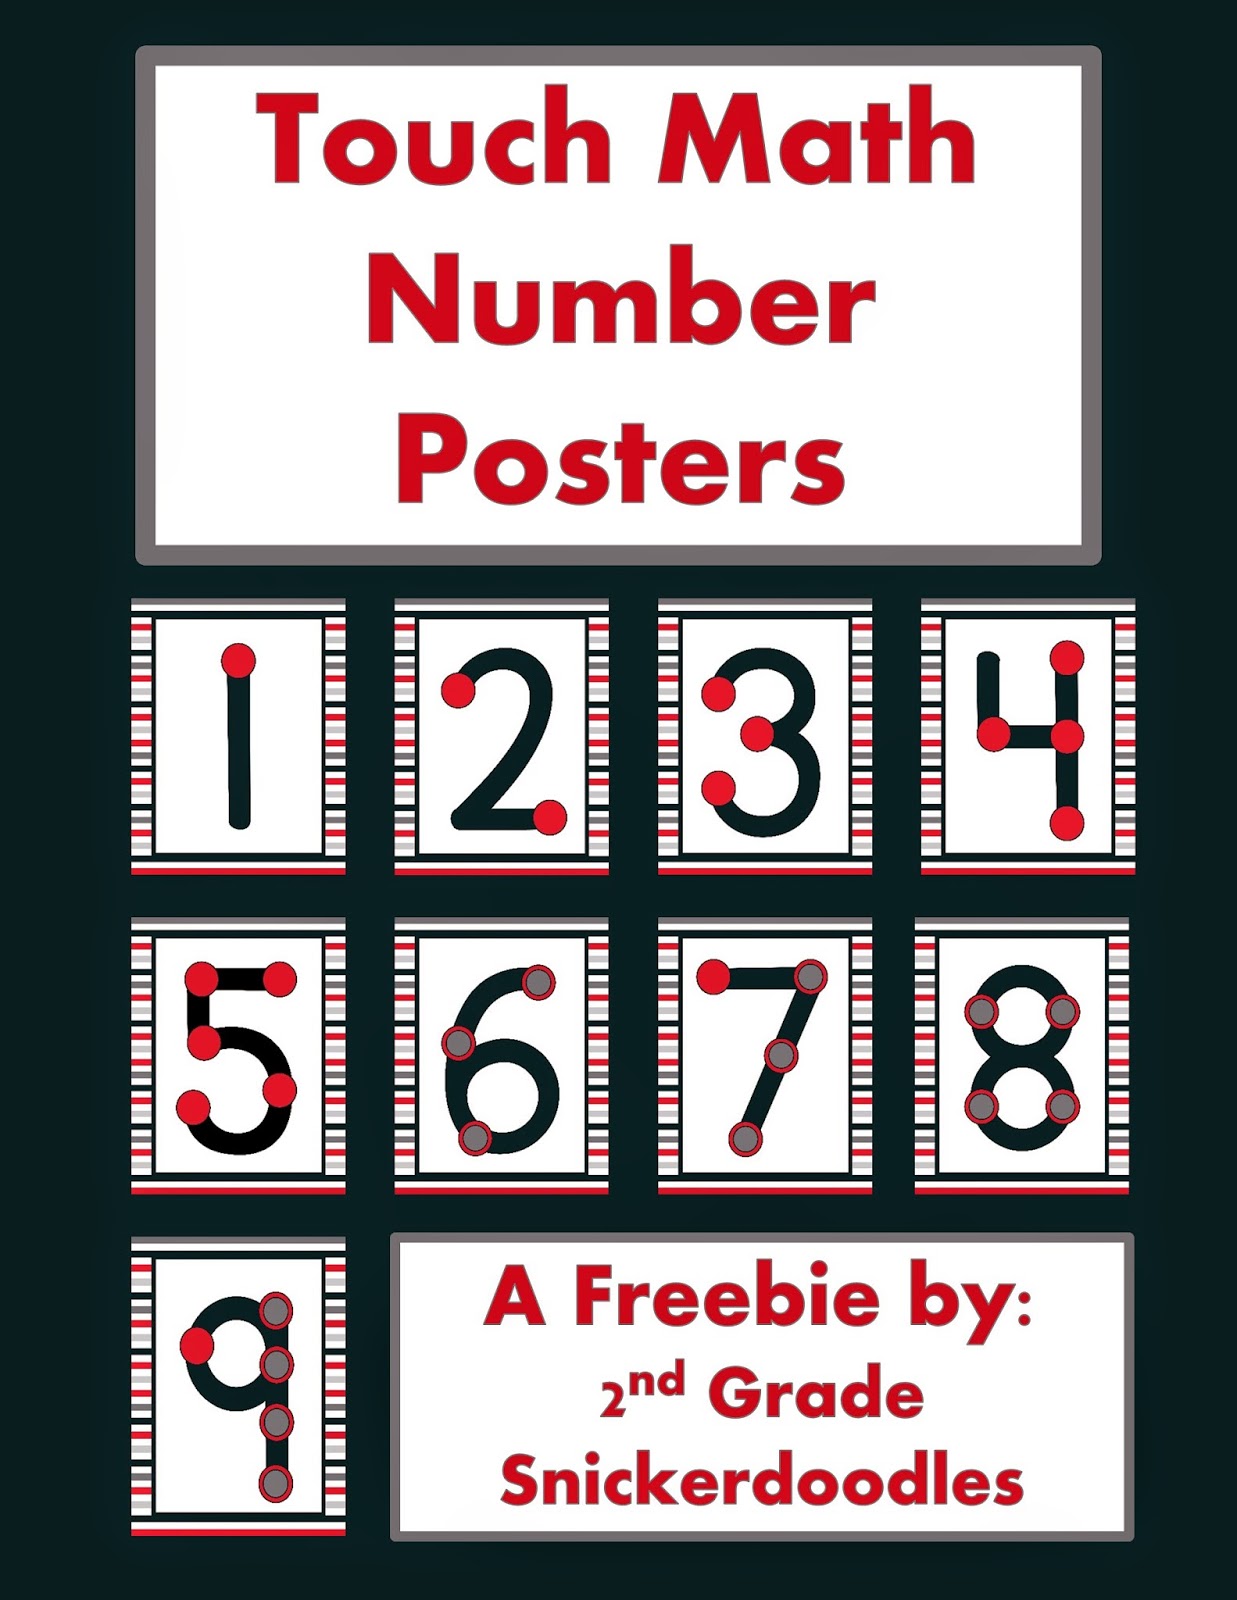 2nd Grade Snickerdoodles: Touch Math Number Posters Freebie